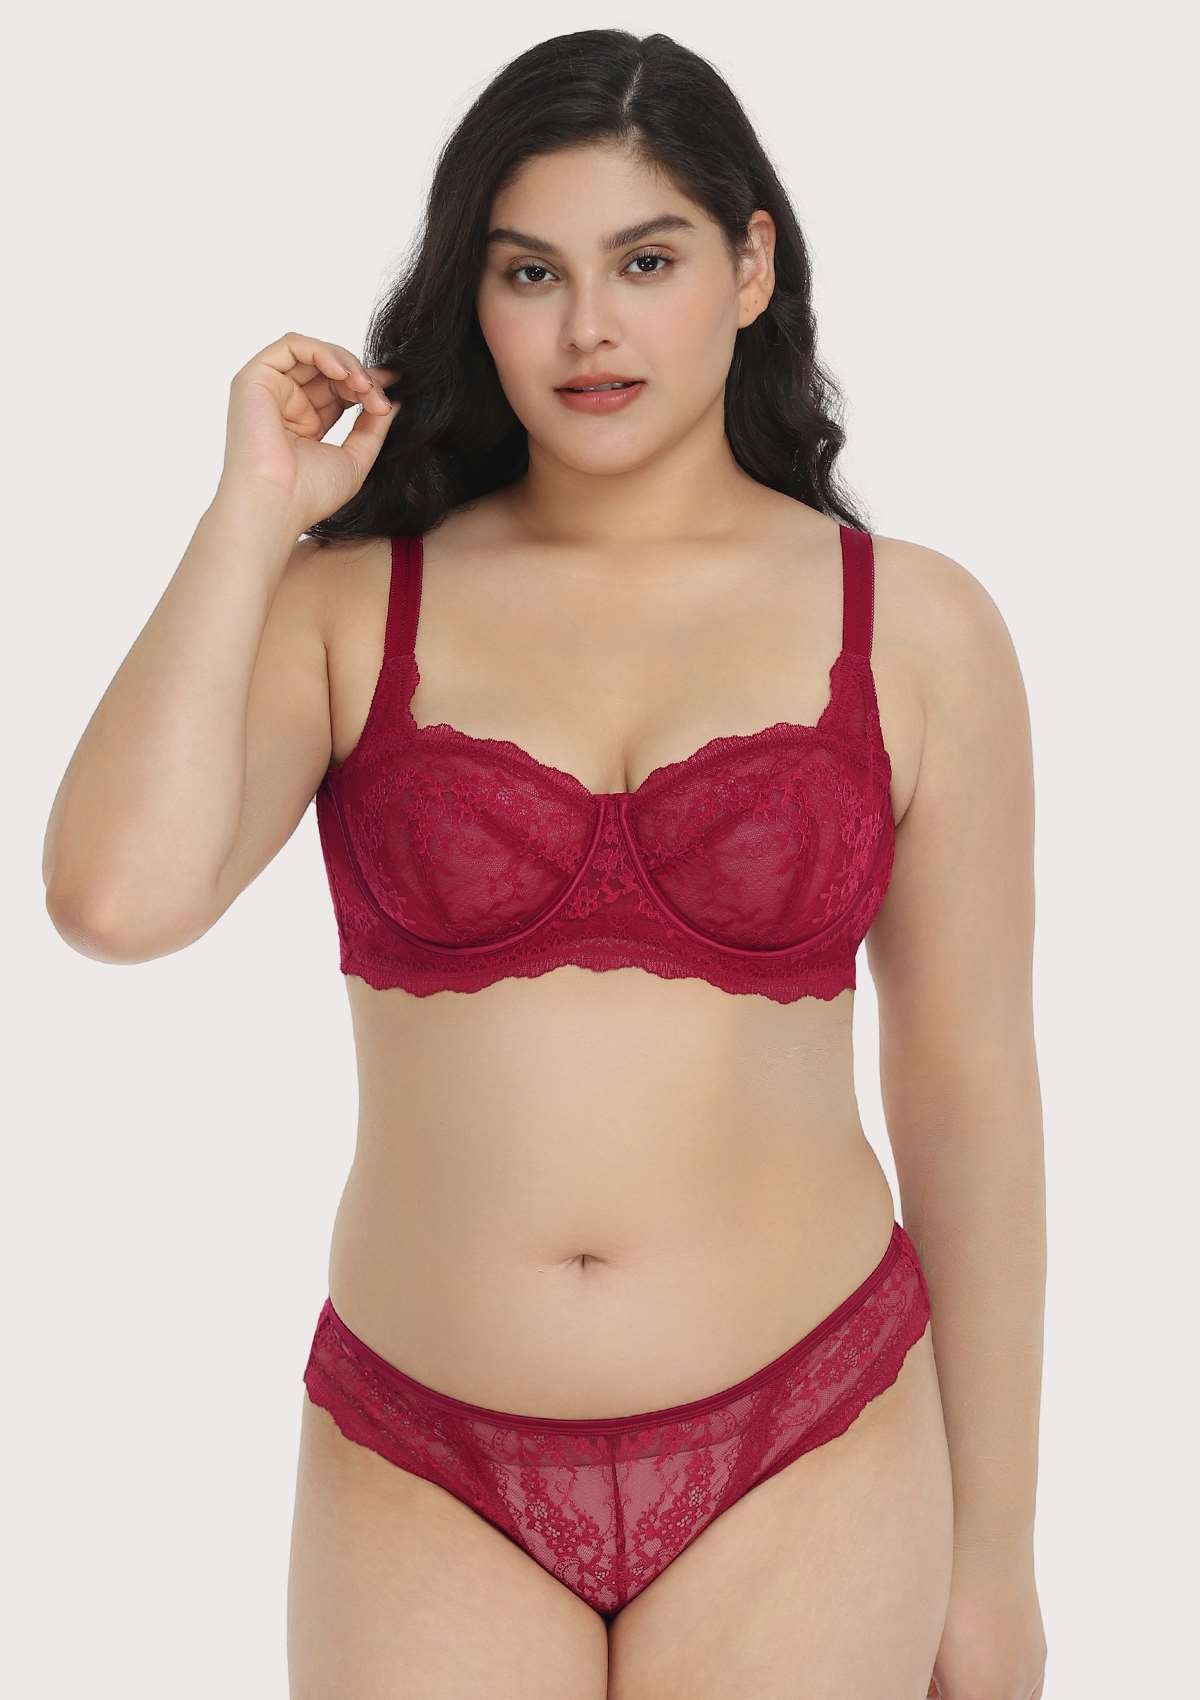 HSIA Floral Lace Unlined Bridal Balconette Bra Set - Supportive Classic - Burgundy / 36 / DD/E